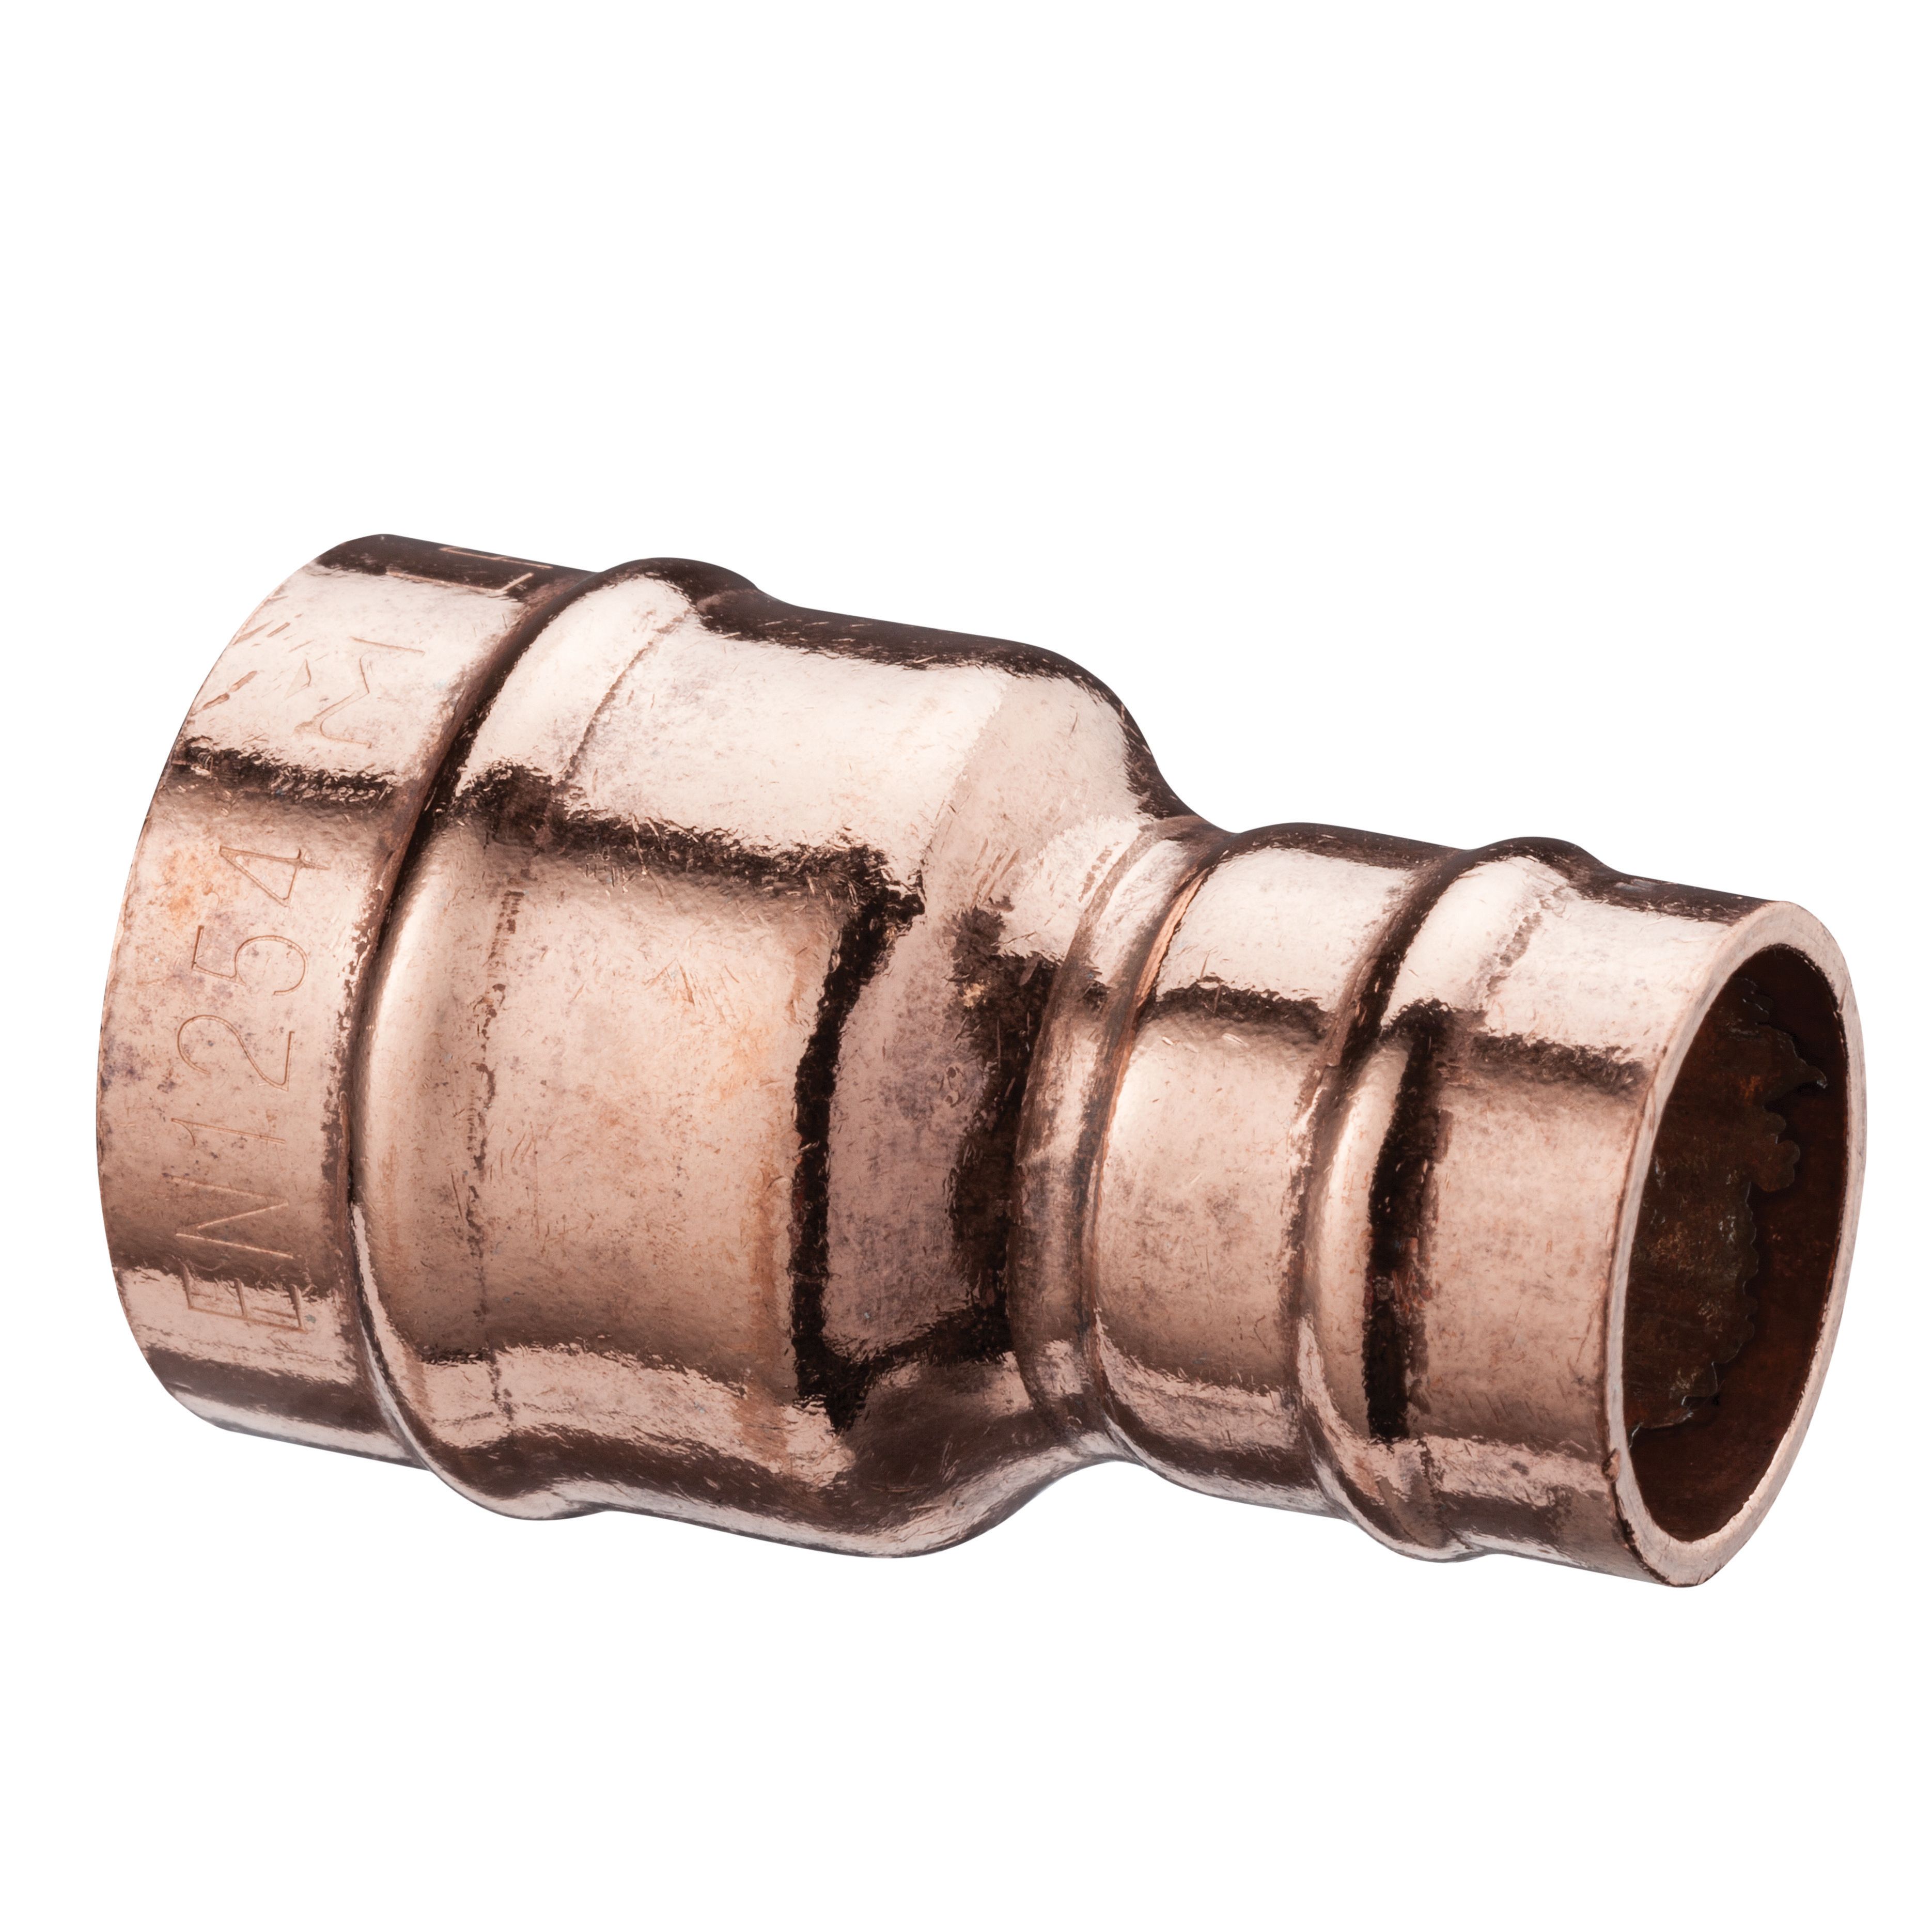 Image of Primaflow Copper Solder Ring Reducing Coupling - 22 X 15mm Pack Of 5